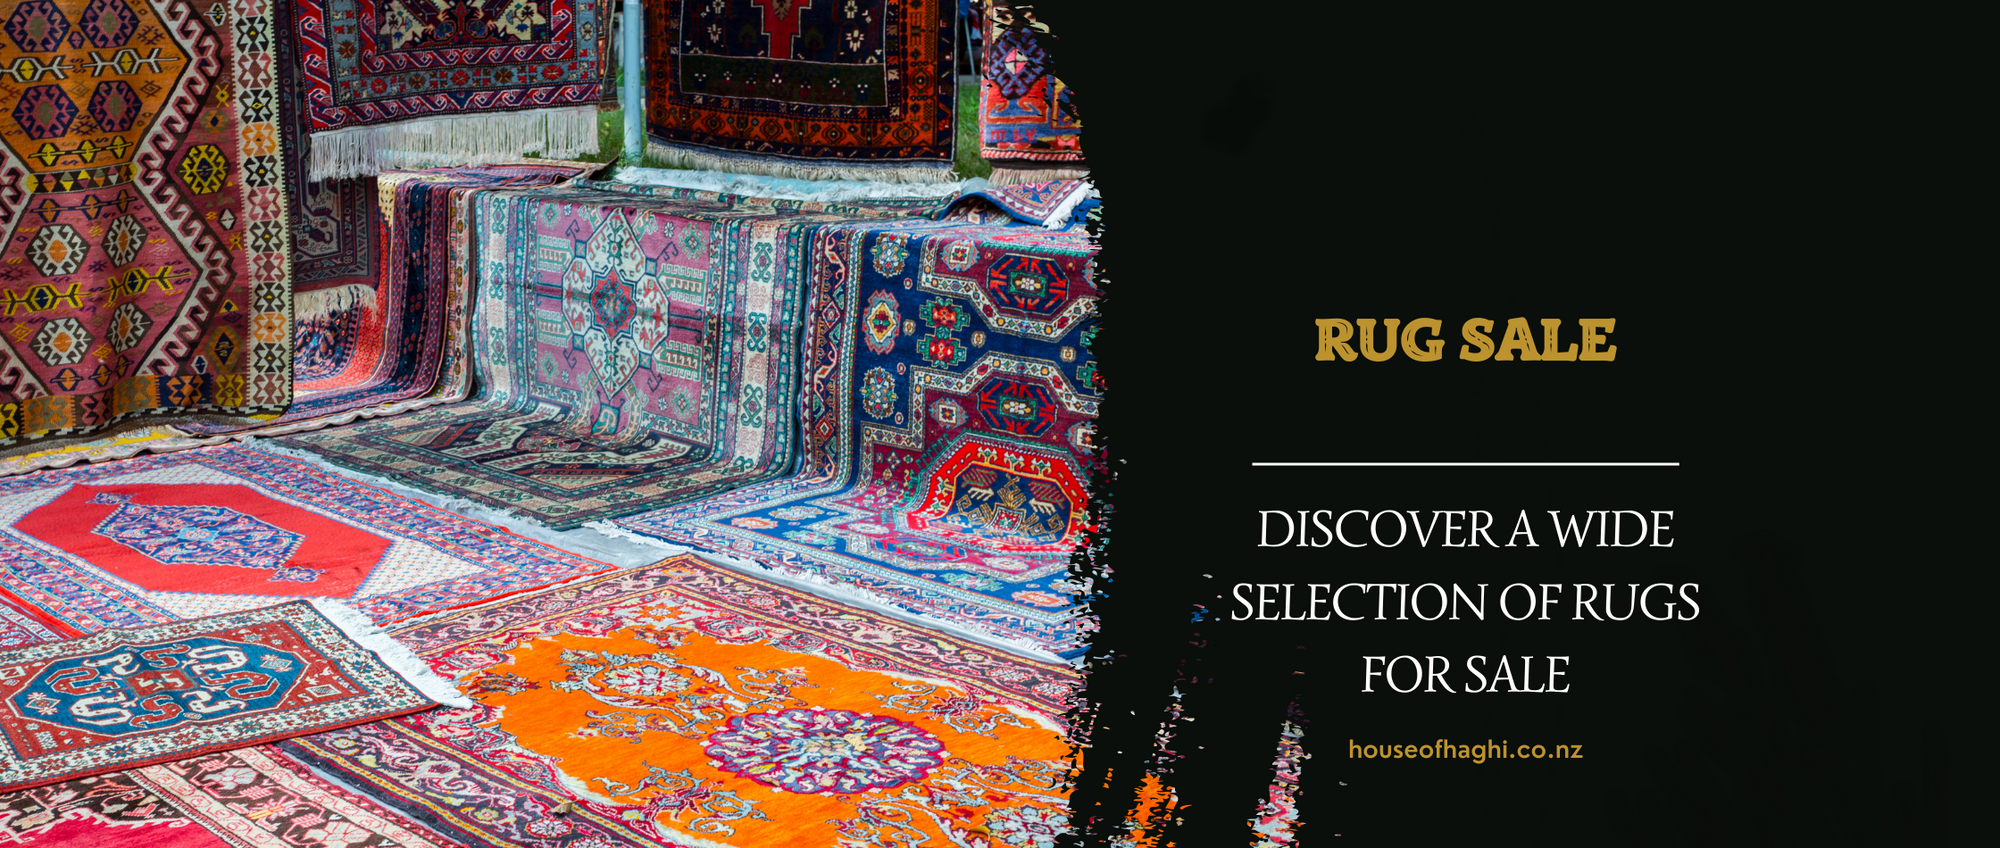 Discover a Wide Selection of Rugs for Sale